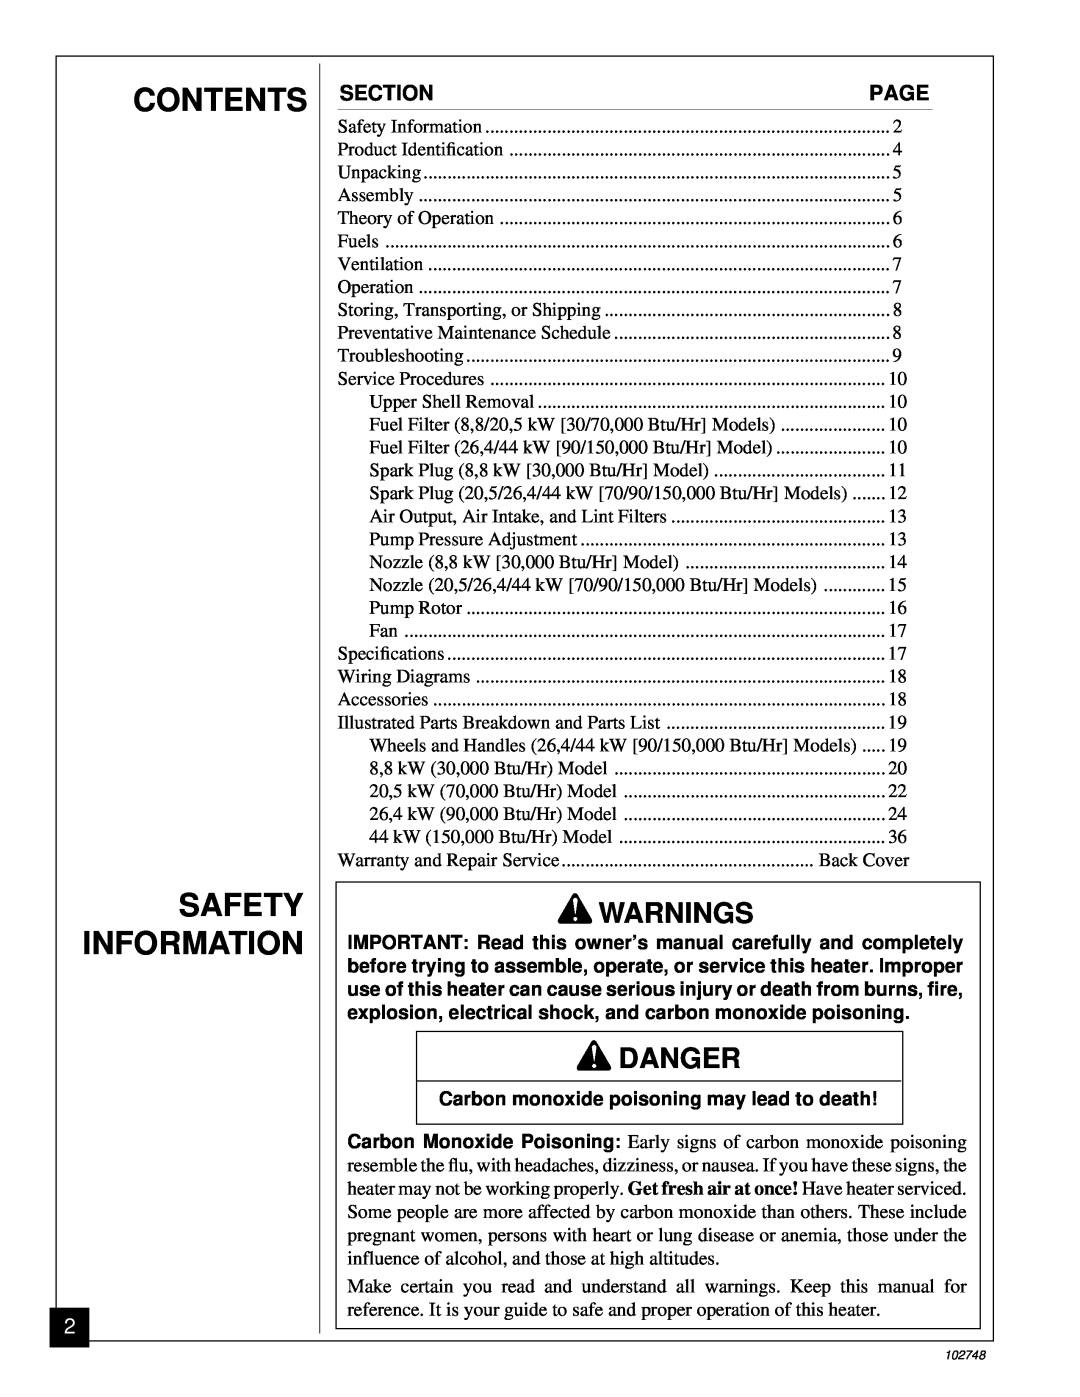 Desa 000) 20, 000) 26 owner manual Contents Safety Information, G 001 WARNINGS, Danger, Section, Page 